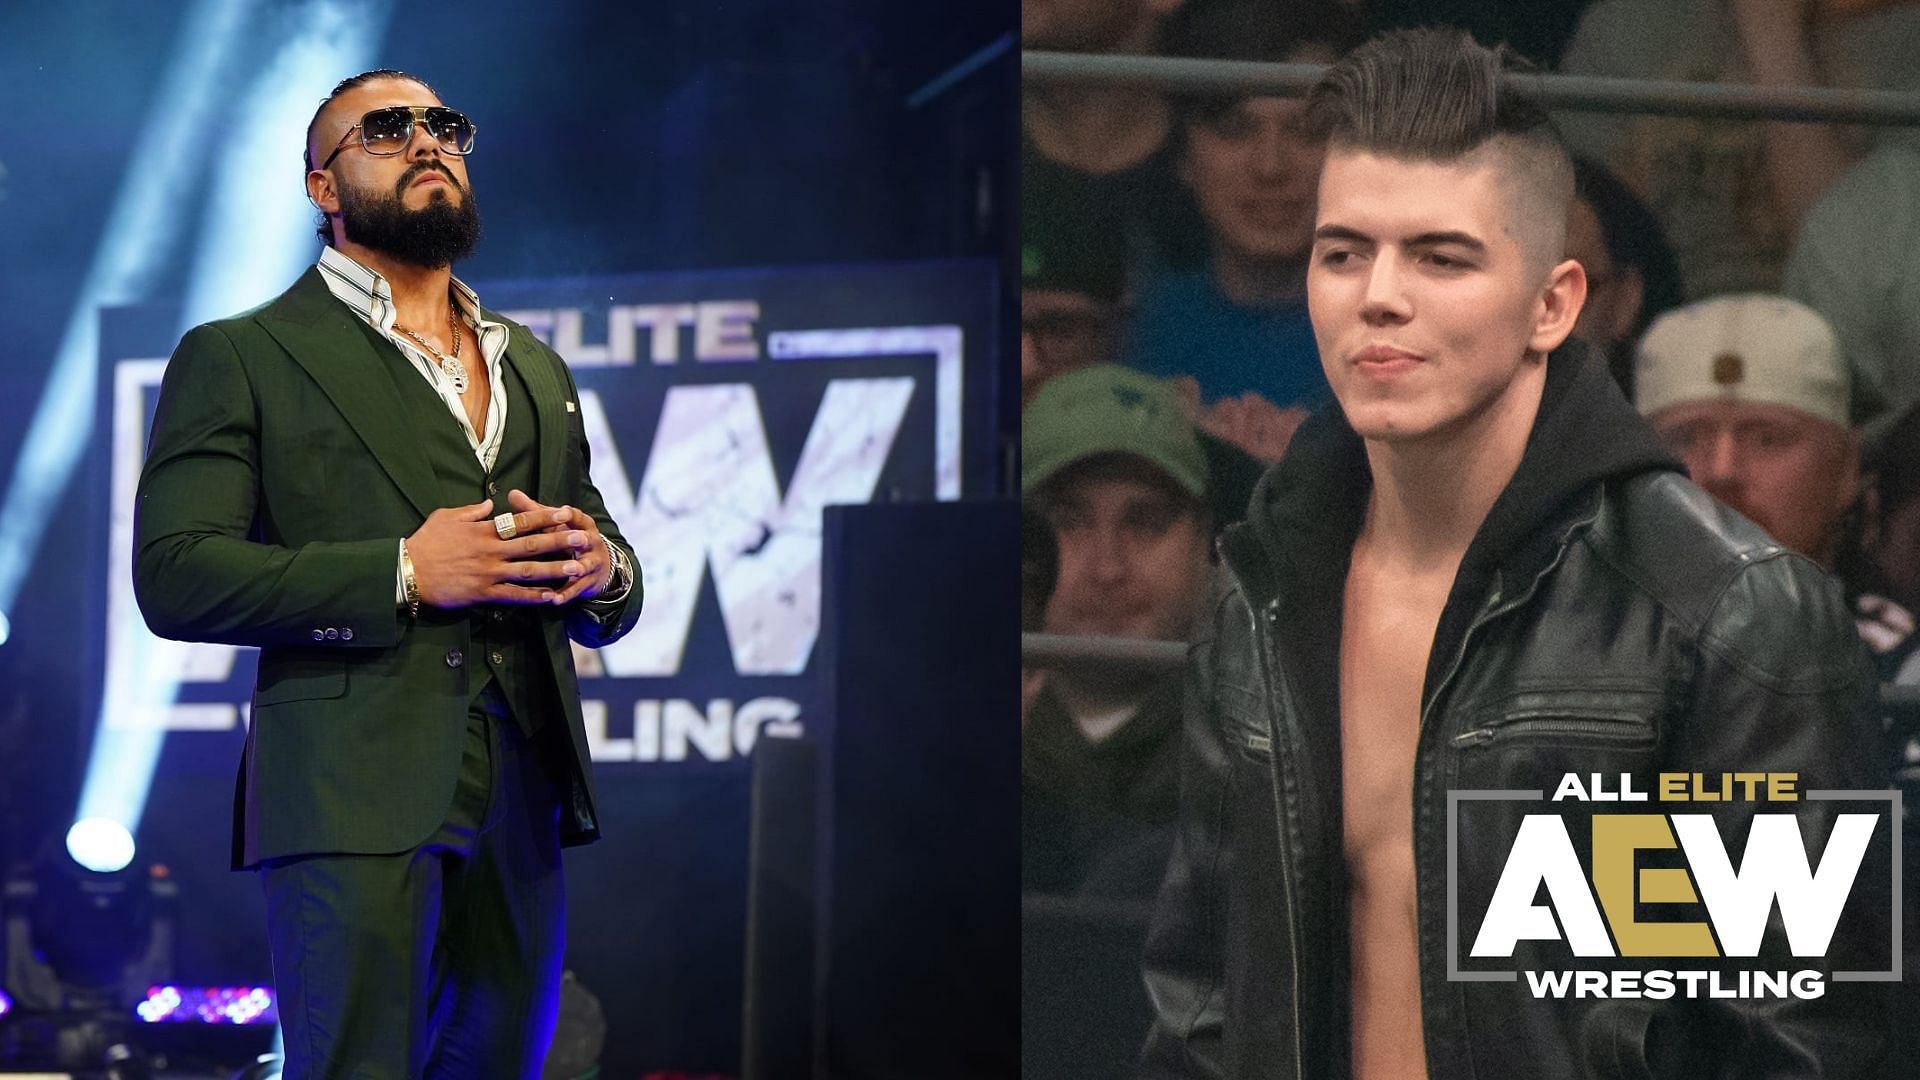 These confrontations allegedly took place behind the scenes in AEW